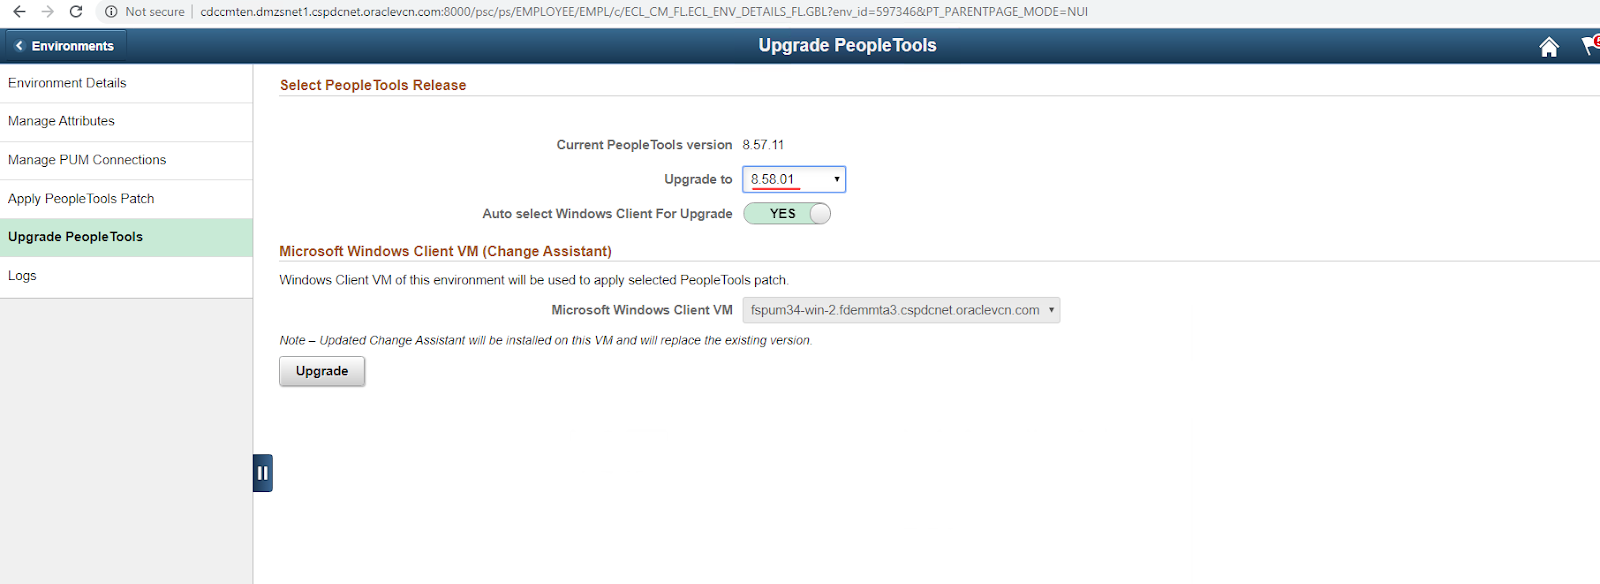 Blog #1 - PeopleSoft Cloud Manager - 1 Click Upgrade-6